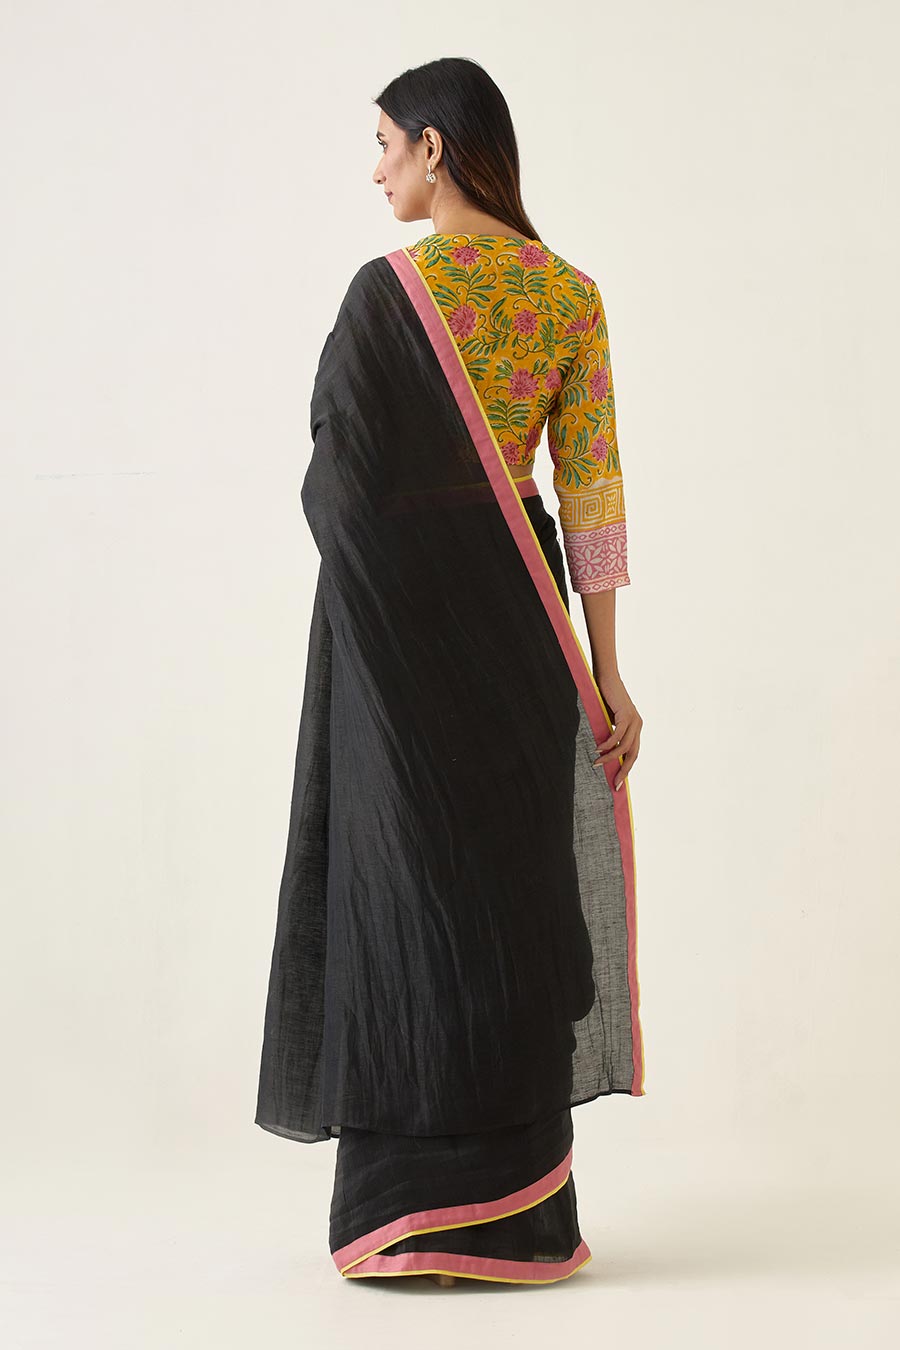 Handcrafted Saree in Black with Yellow & Pink Border